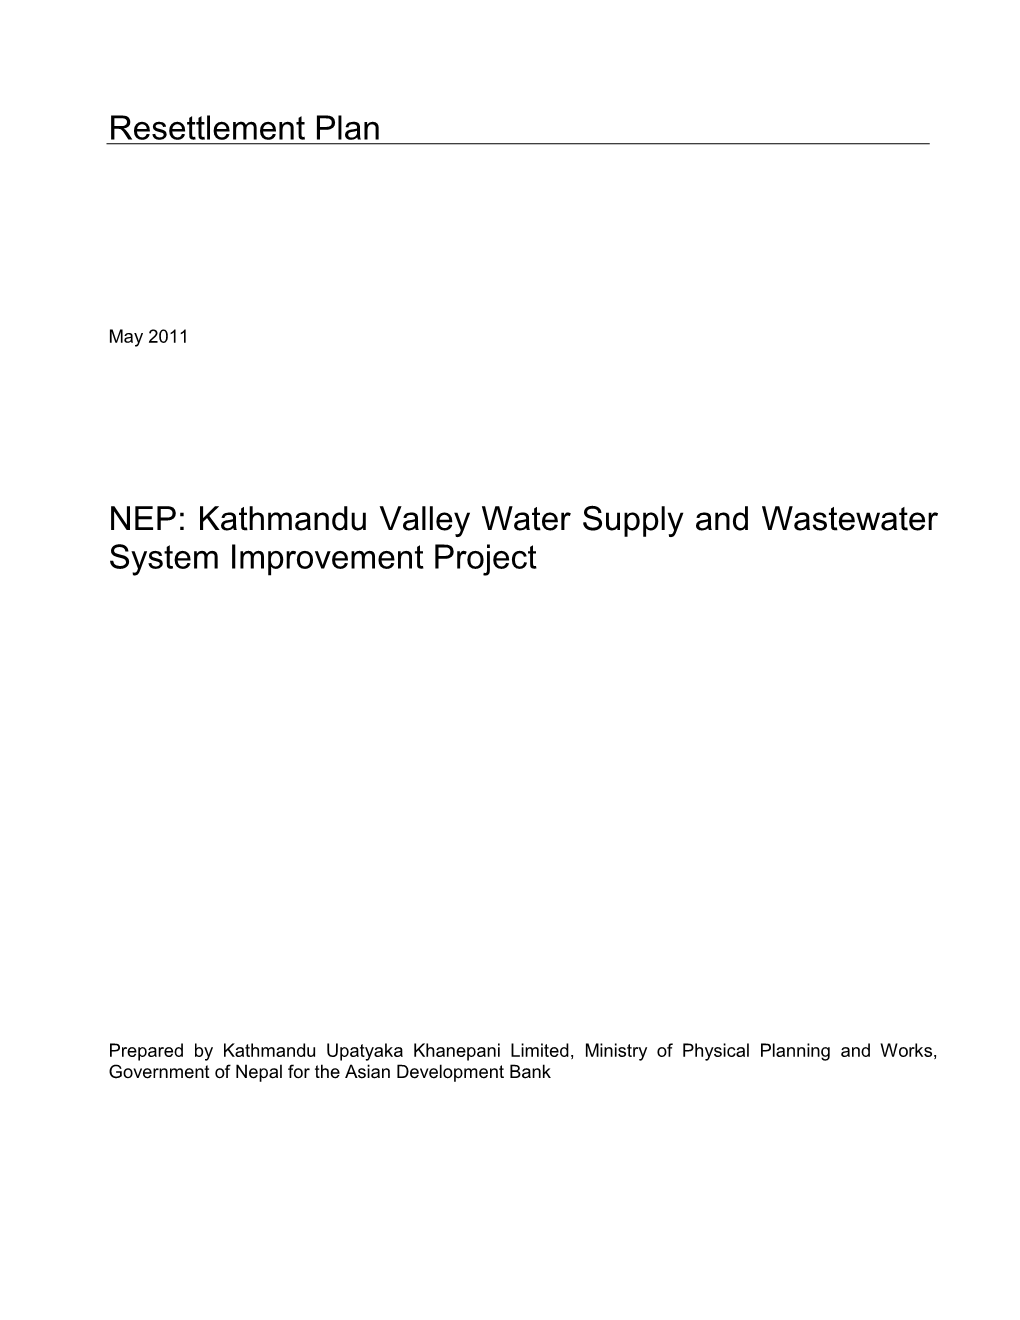 Kathmandu Valley Water Supply and Wastewater System Improvement Project